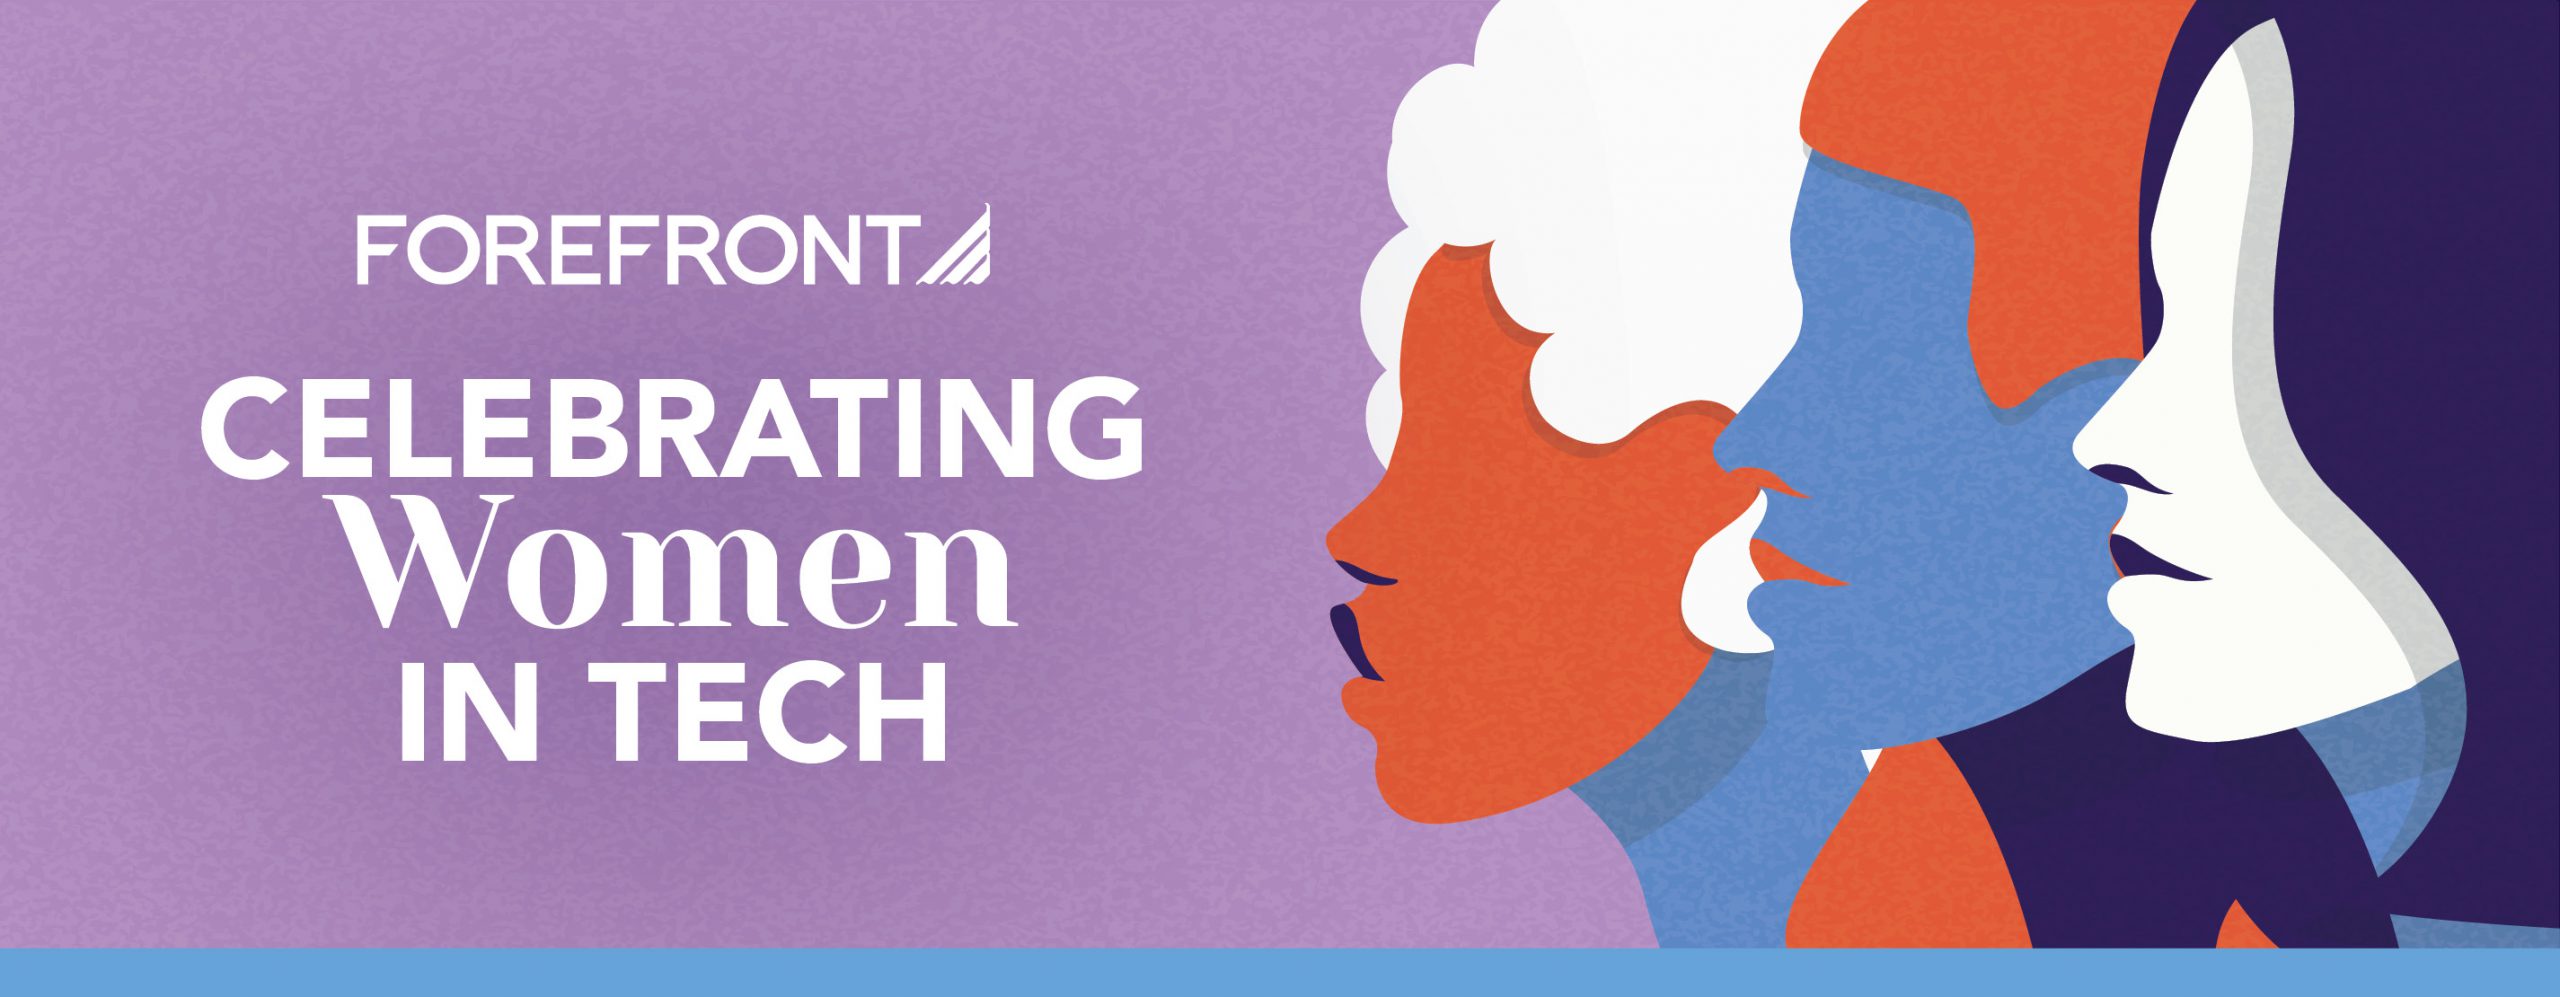 ForeFront - Celebrating Women in Tech